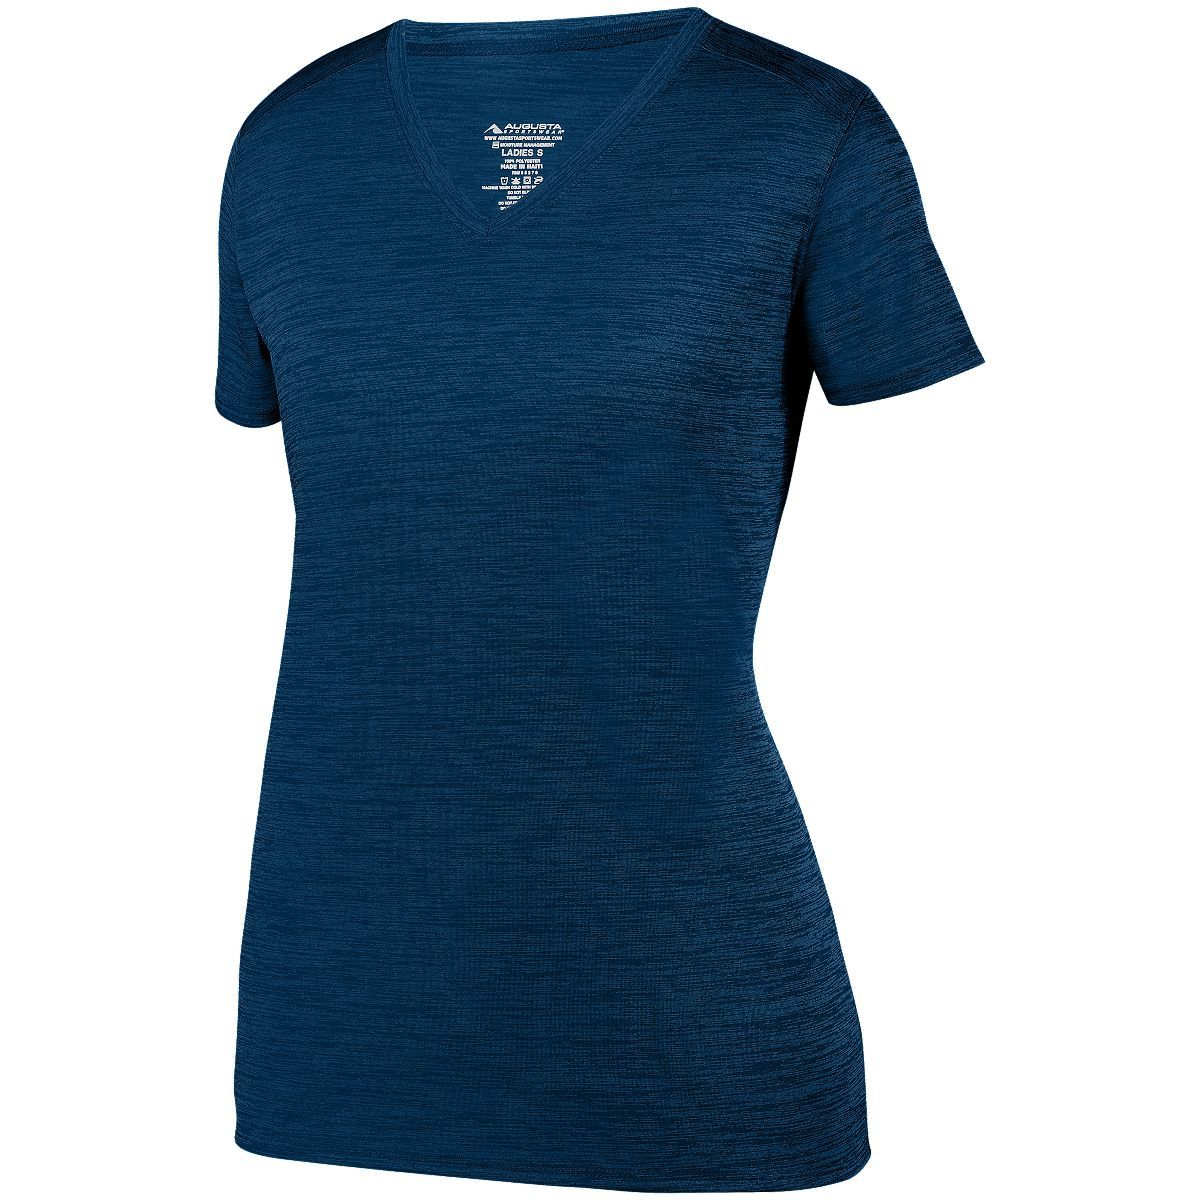 Augusta Sportswear Ladies Shadow Tonal Heather Training Tee in Navy  -Part of the Ladies, Ladies-Tee-Shirt, T-Shirts, Augusta-Products, Shirts, Tonal-Fleece-Collection product lines at KanaleyCreations.com